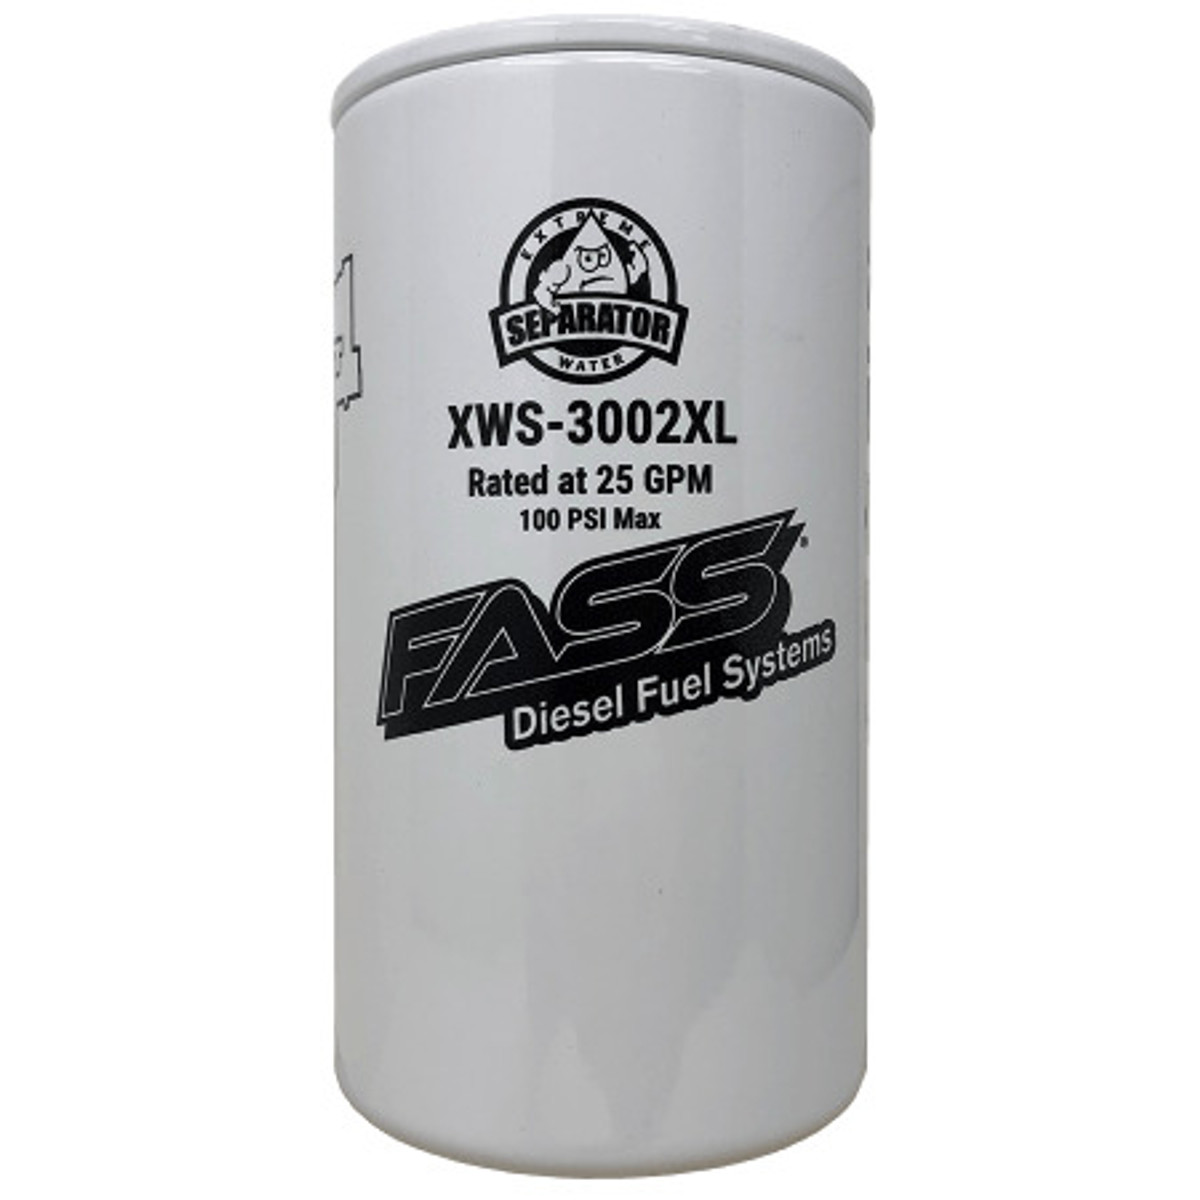 FASS Fuel Air Separation Systems XWS3002XL Extended Length Extreme Water Separator for use with FASS Fuel Systems 